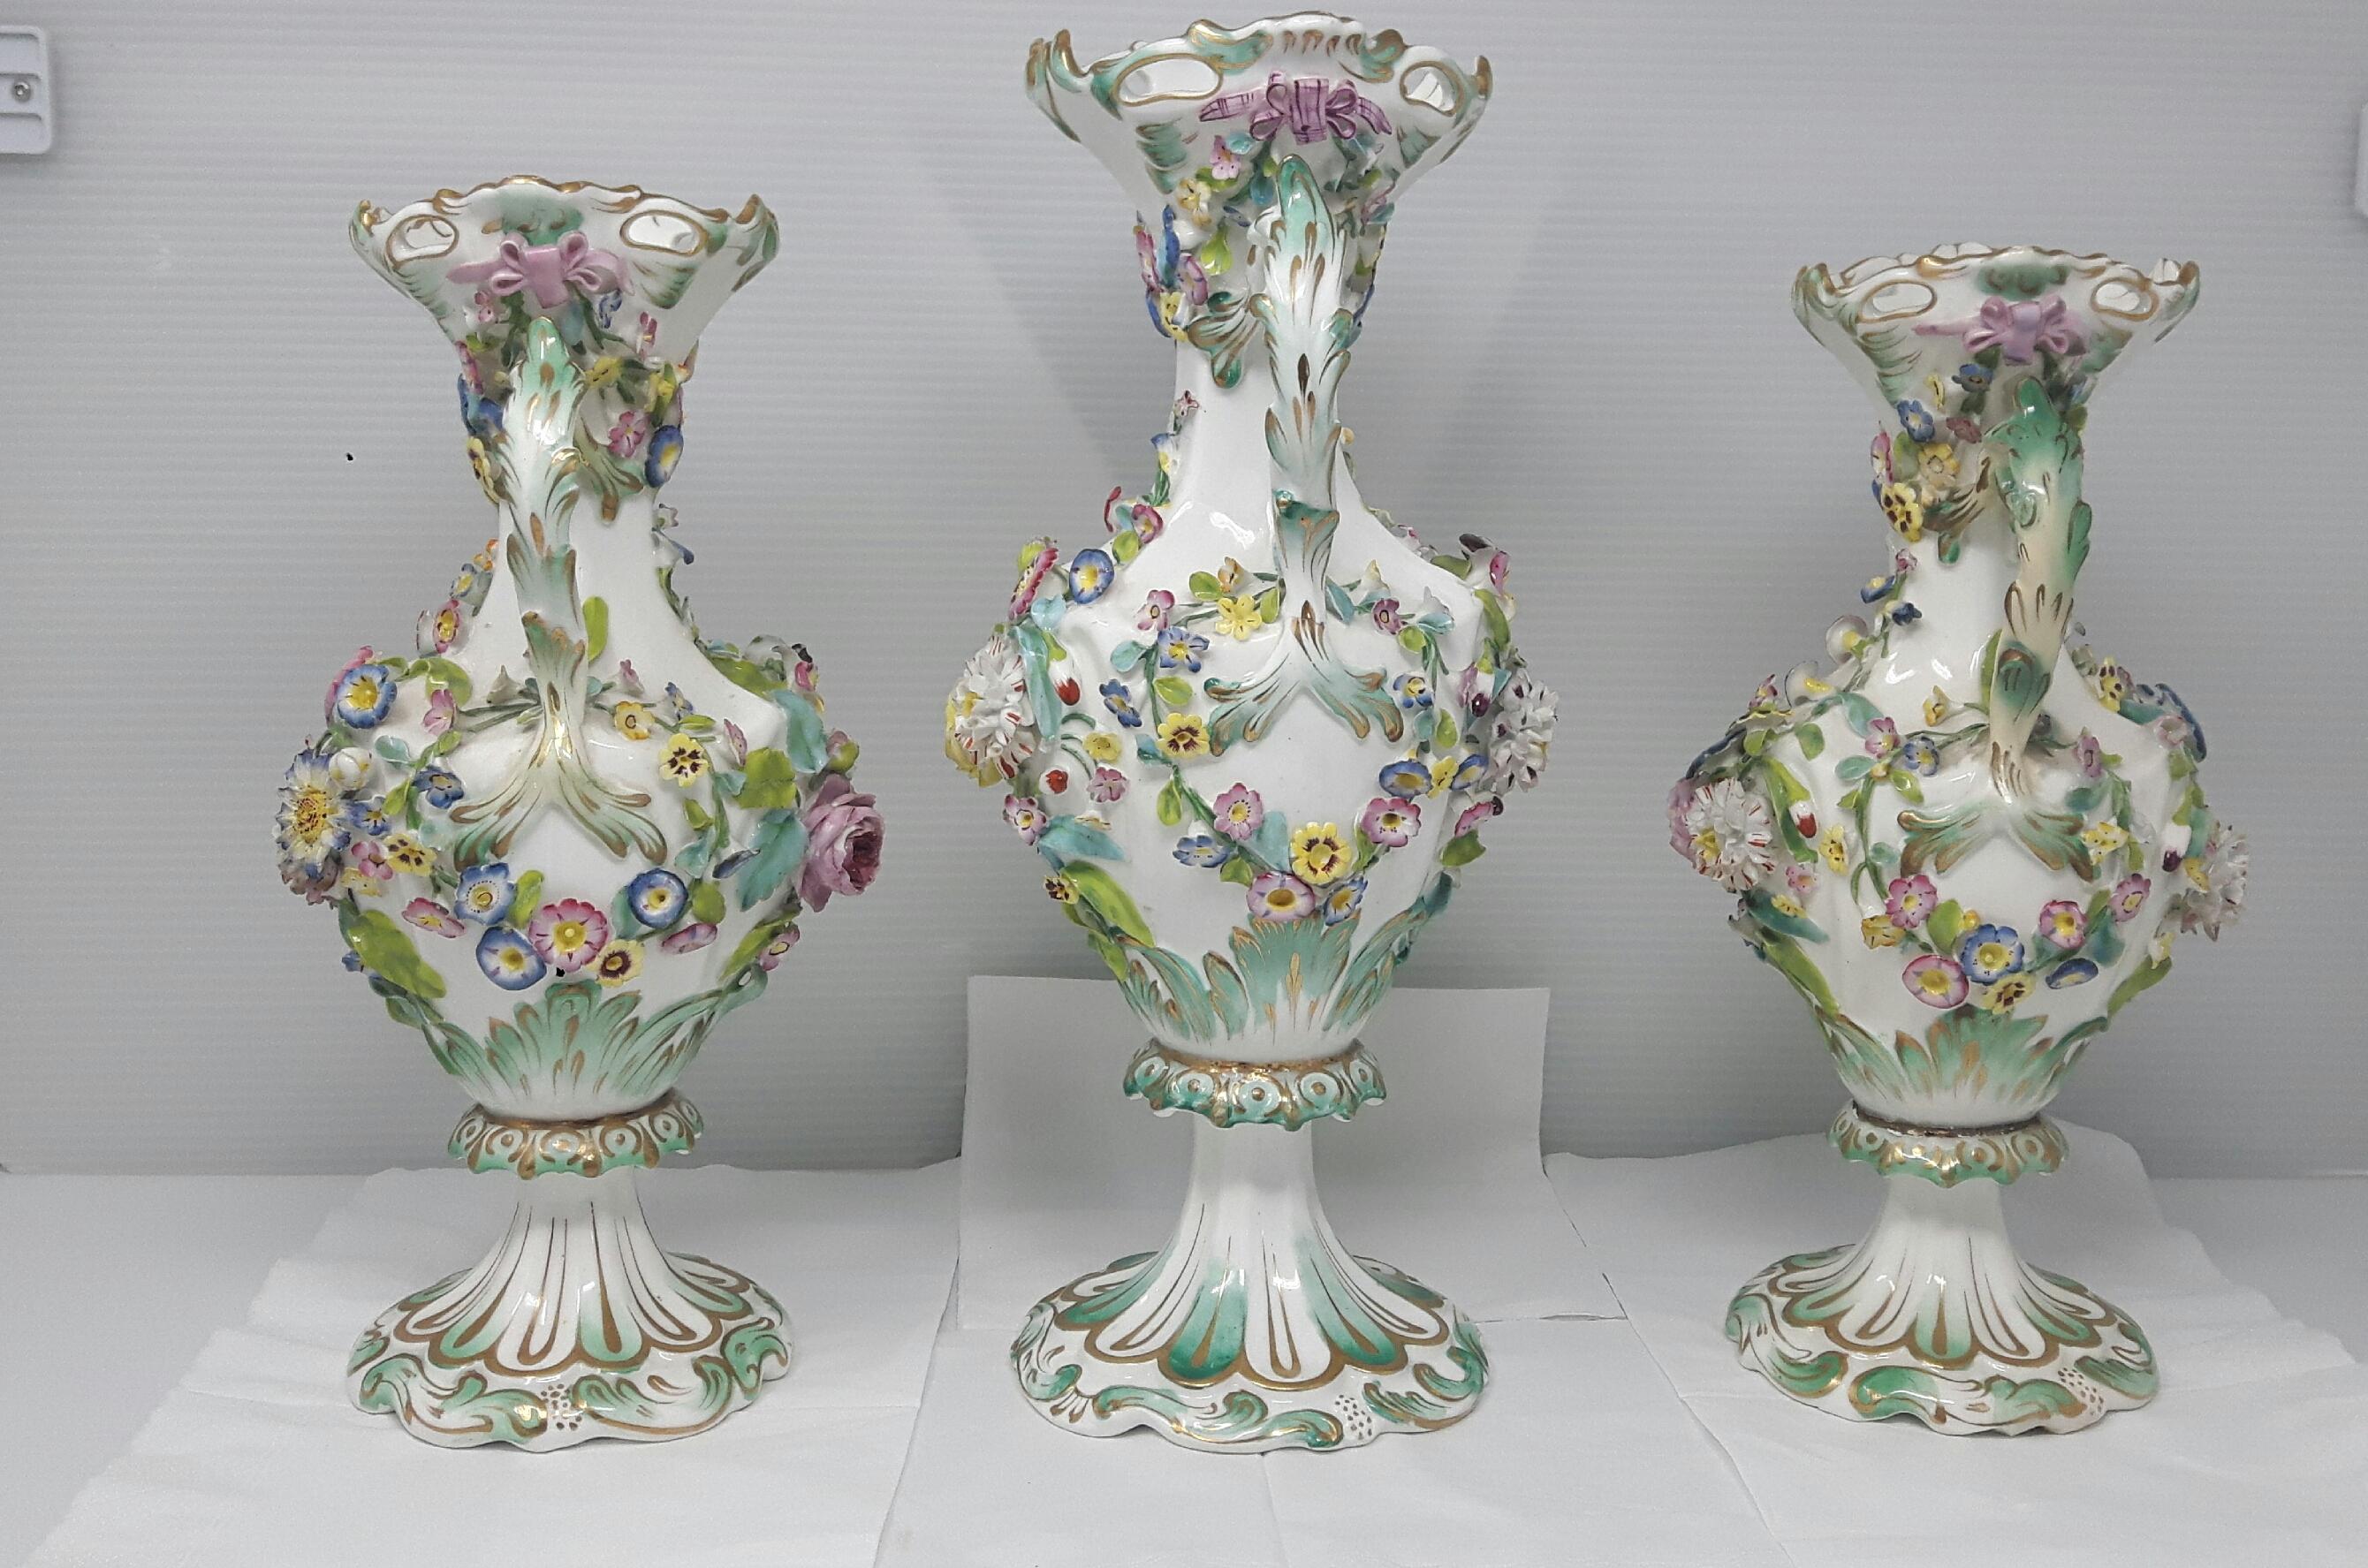 Neoclassical Revival 19th Century English Porcelain Garniture For Sale